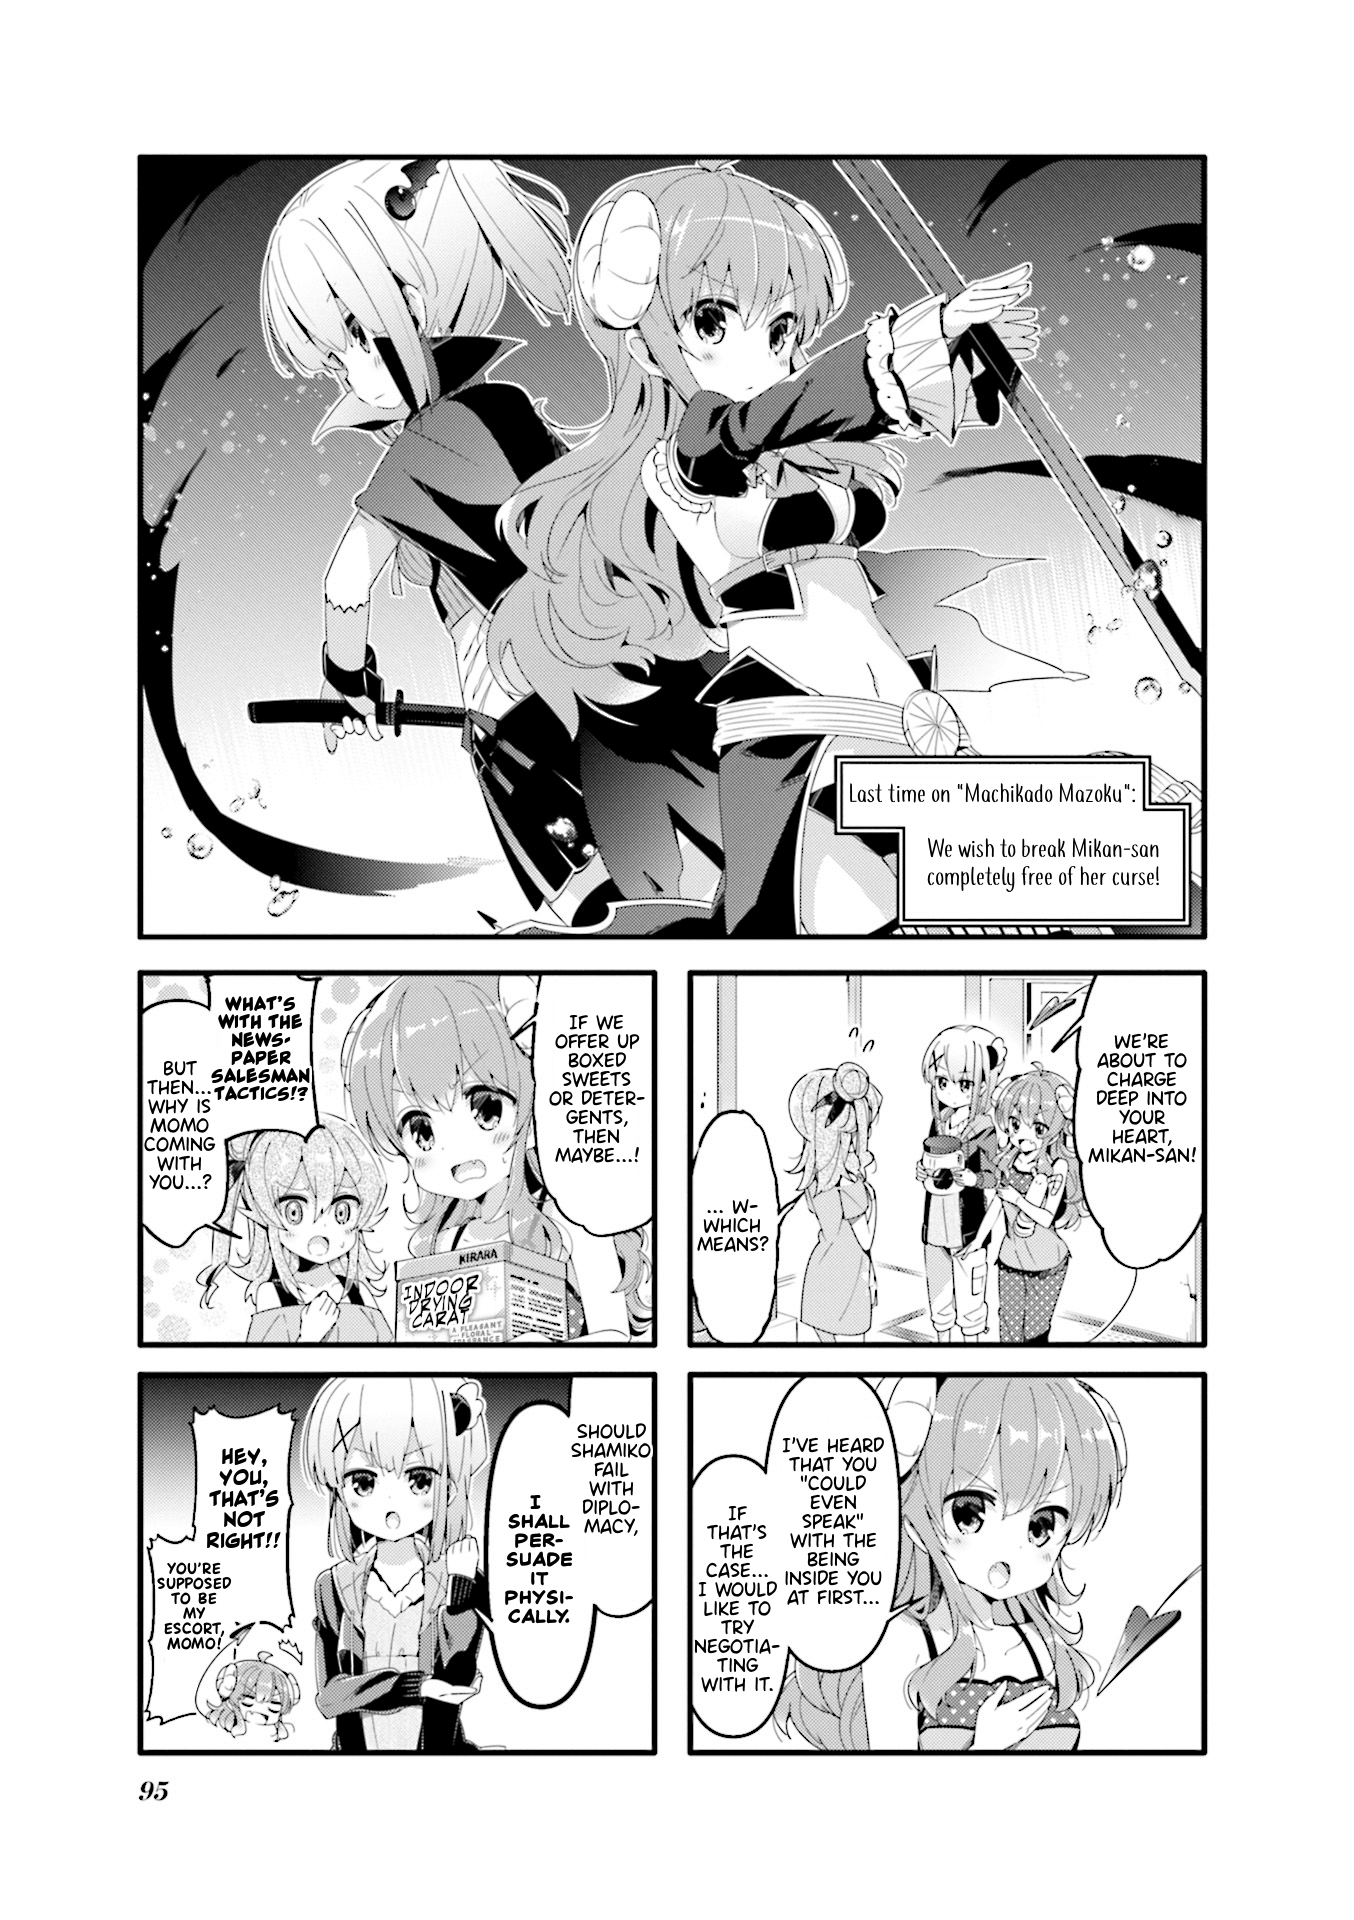 Machikado Mazoku Vol.4 Chapter 50: The Battle Within The Dreamscape!! Unleash The Legendary Weapon!! - Picture 1